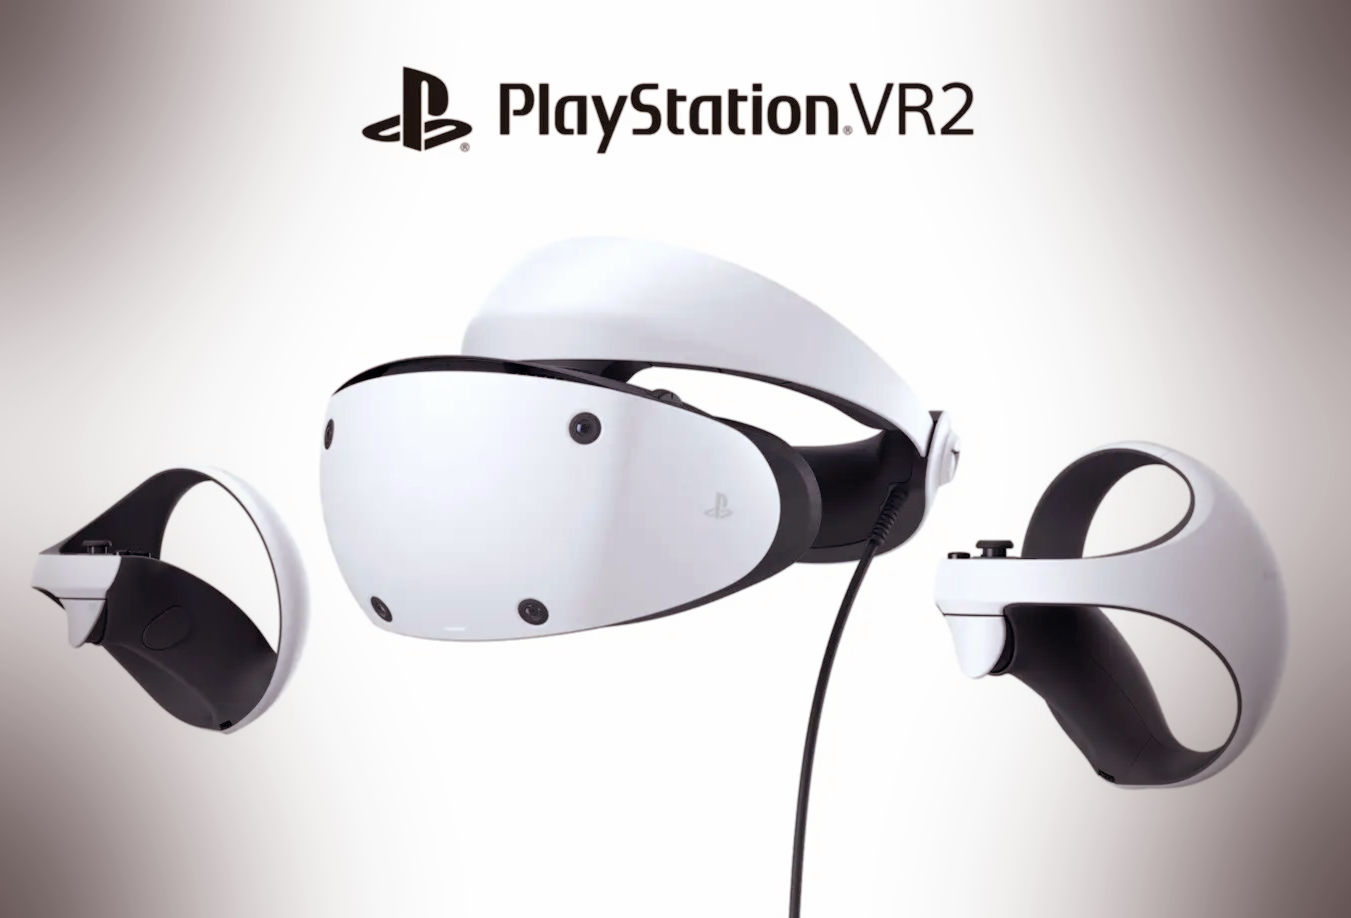 Sony shows off PlayStation VR2 virtual reality headset - VideoCardz 